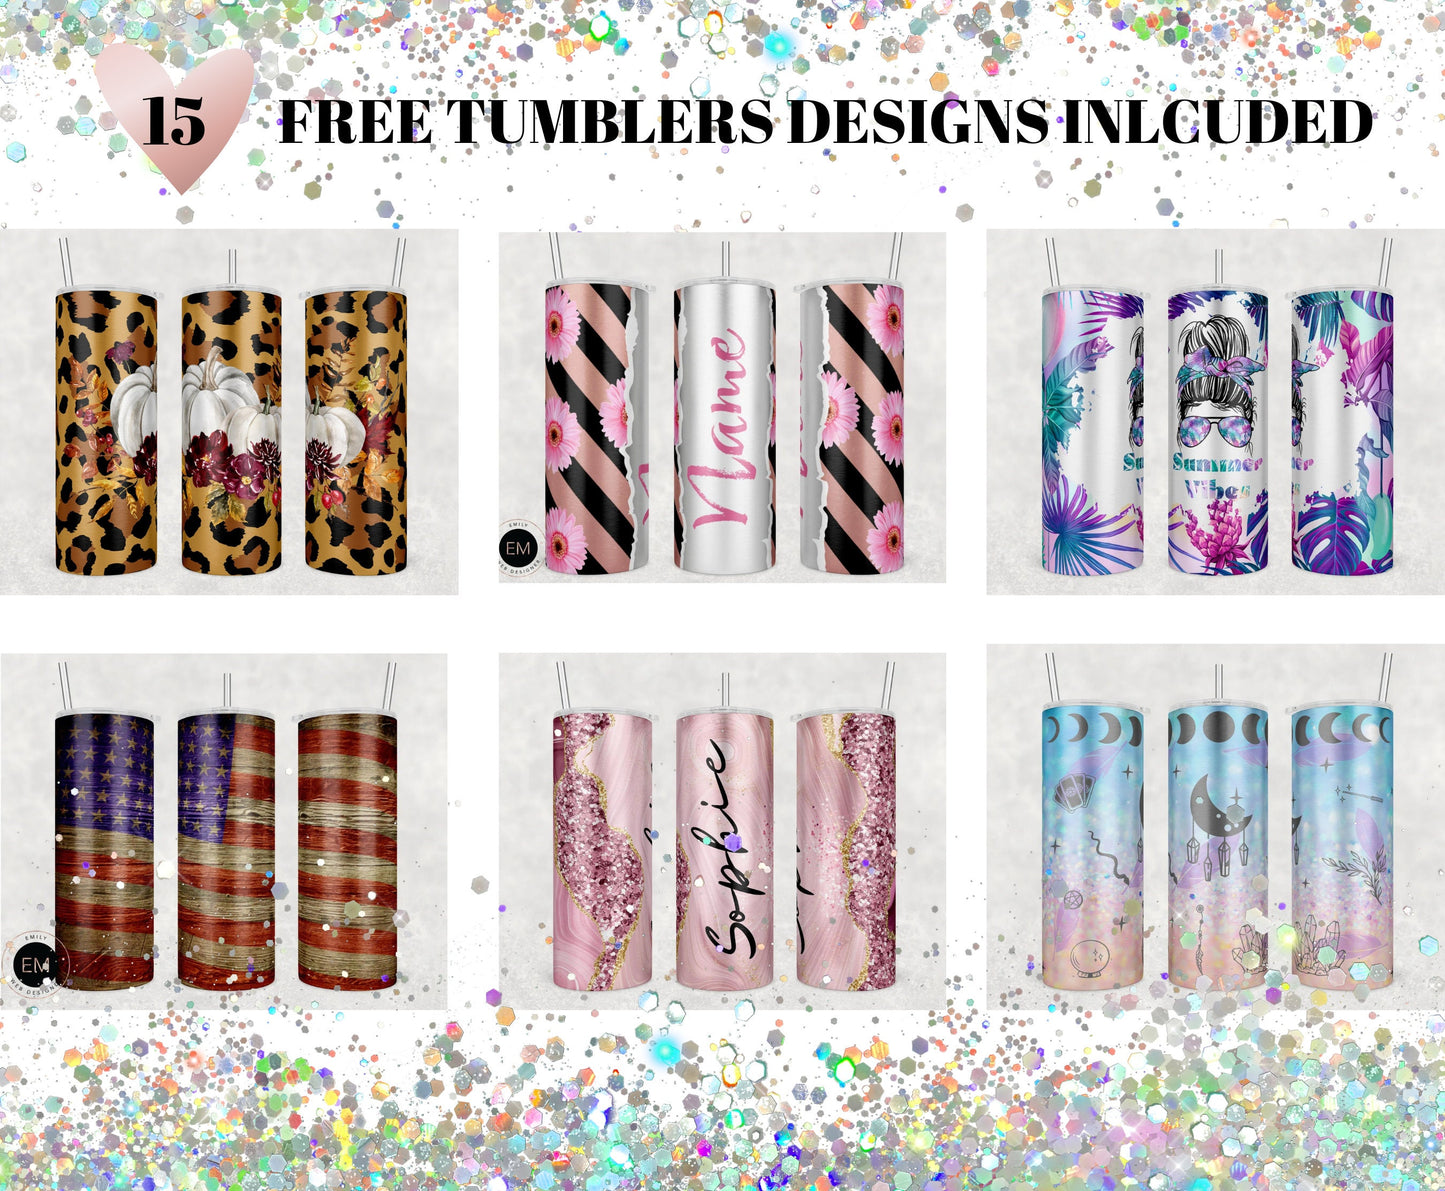 Rainbow Glitter Print Add Your Own Text Name Sublimation Tumbler Designs - 20oz Skinny Tumbler Wraps Templates - PNG